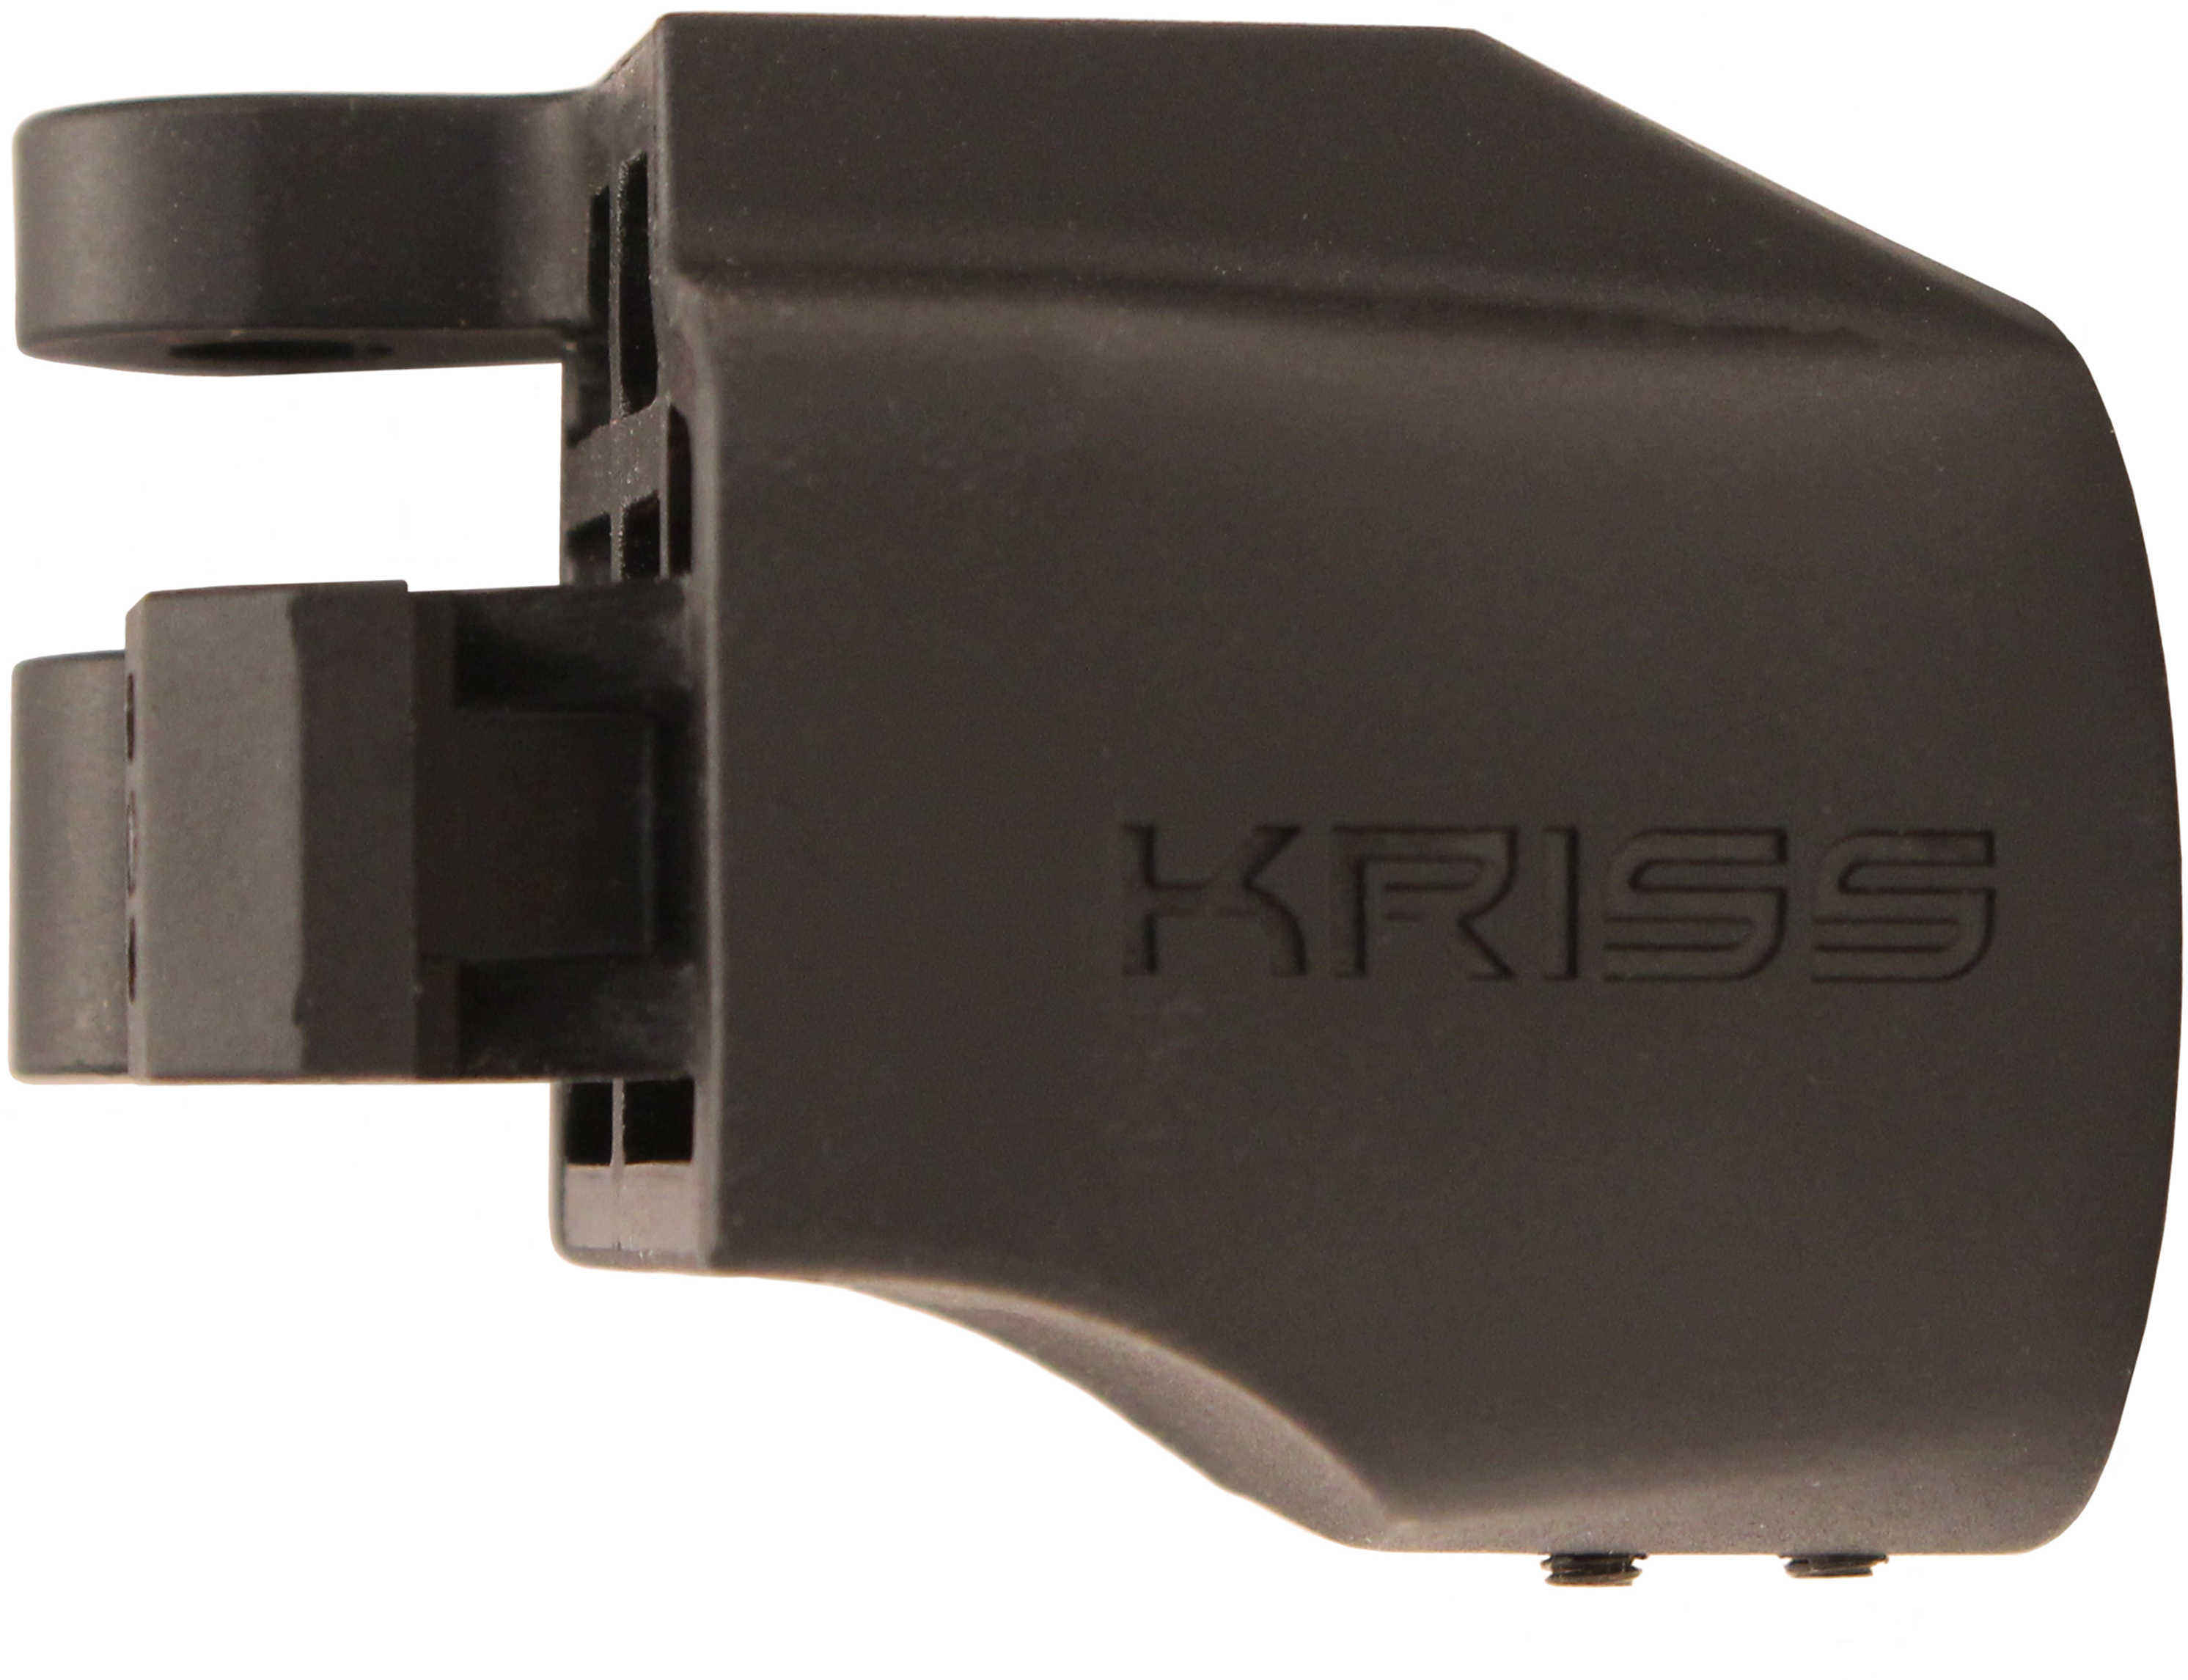 KRISS USA Inc VECTOR Adapter Black Threaded Adaptor Piece VECTOP Gen & II Will Accept Any Commercial Or MILS